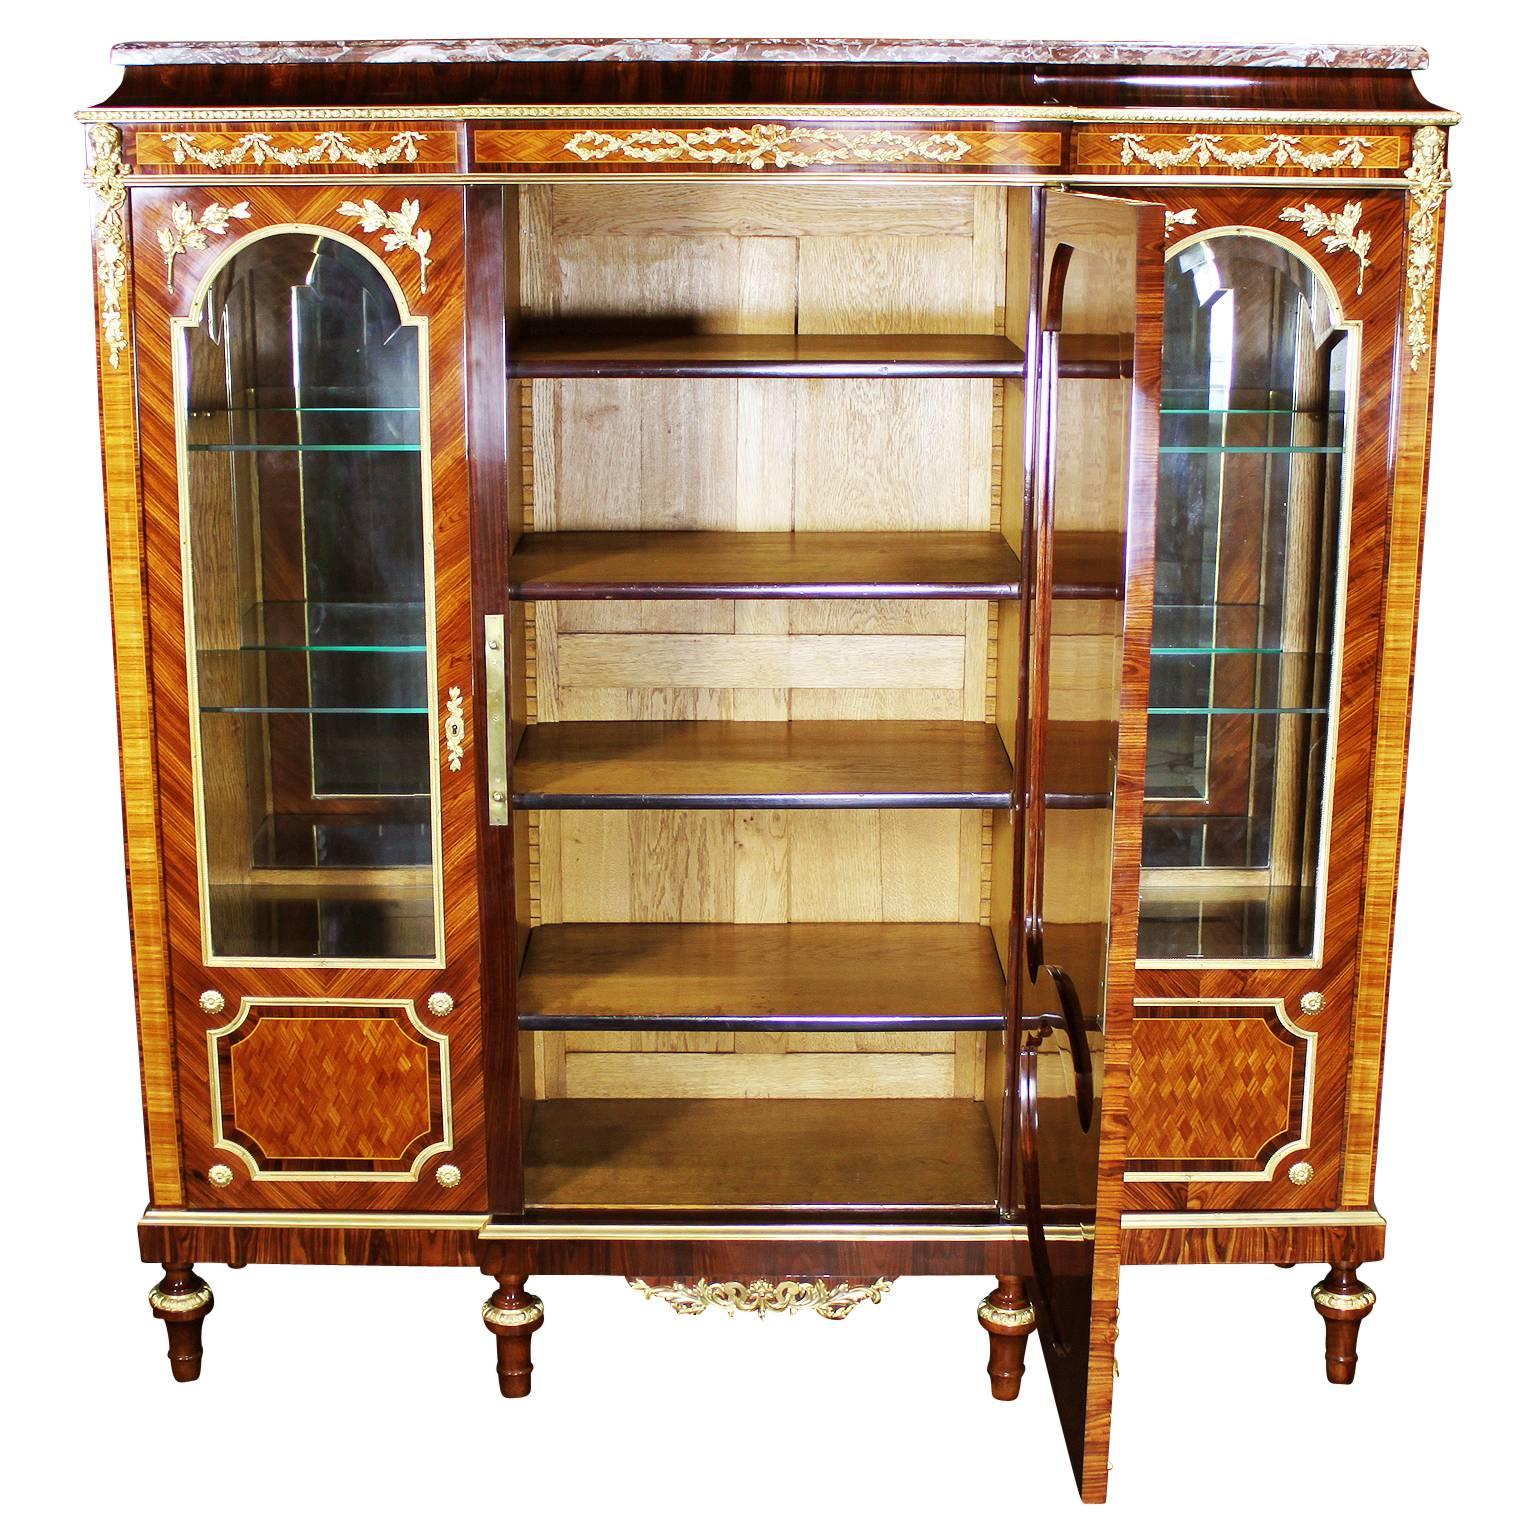 French 19th-20th Century Louis XVI Style Mahogany, Kingwood Parquetry Vitrine For Sale 3